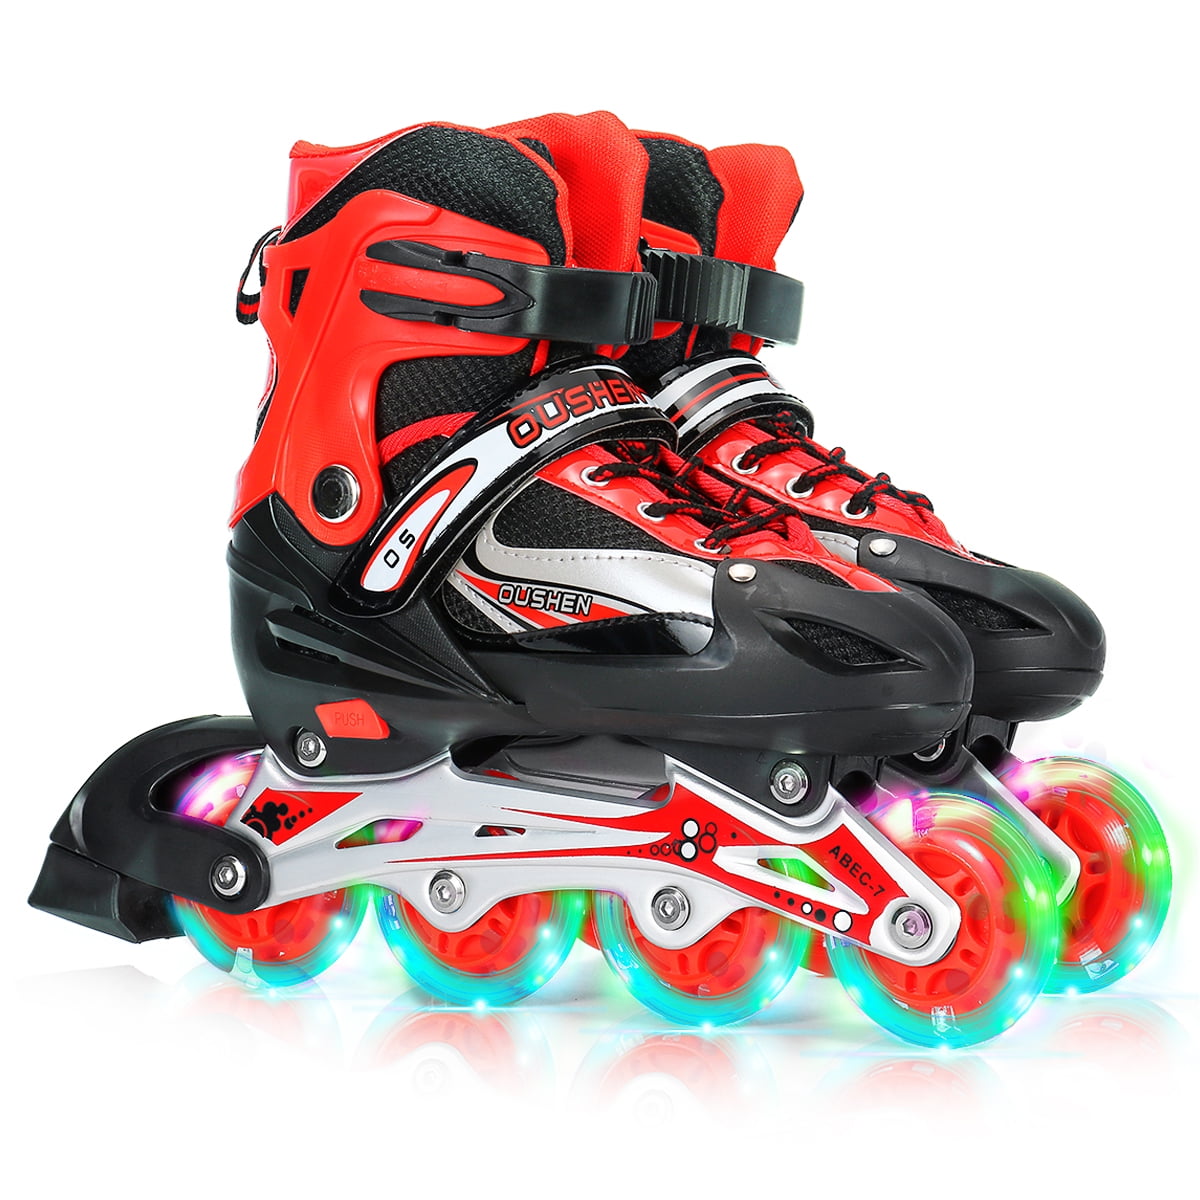 Roller Skates with Flashing Light up Wheels for Boys and Girls Adjustable Rollerblades Safe and Durable Children Inline Skates Perfect for Beginners 